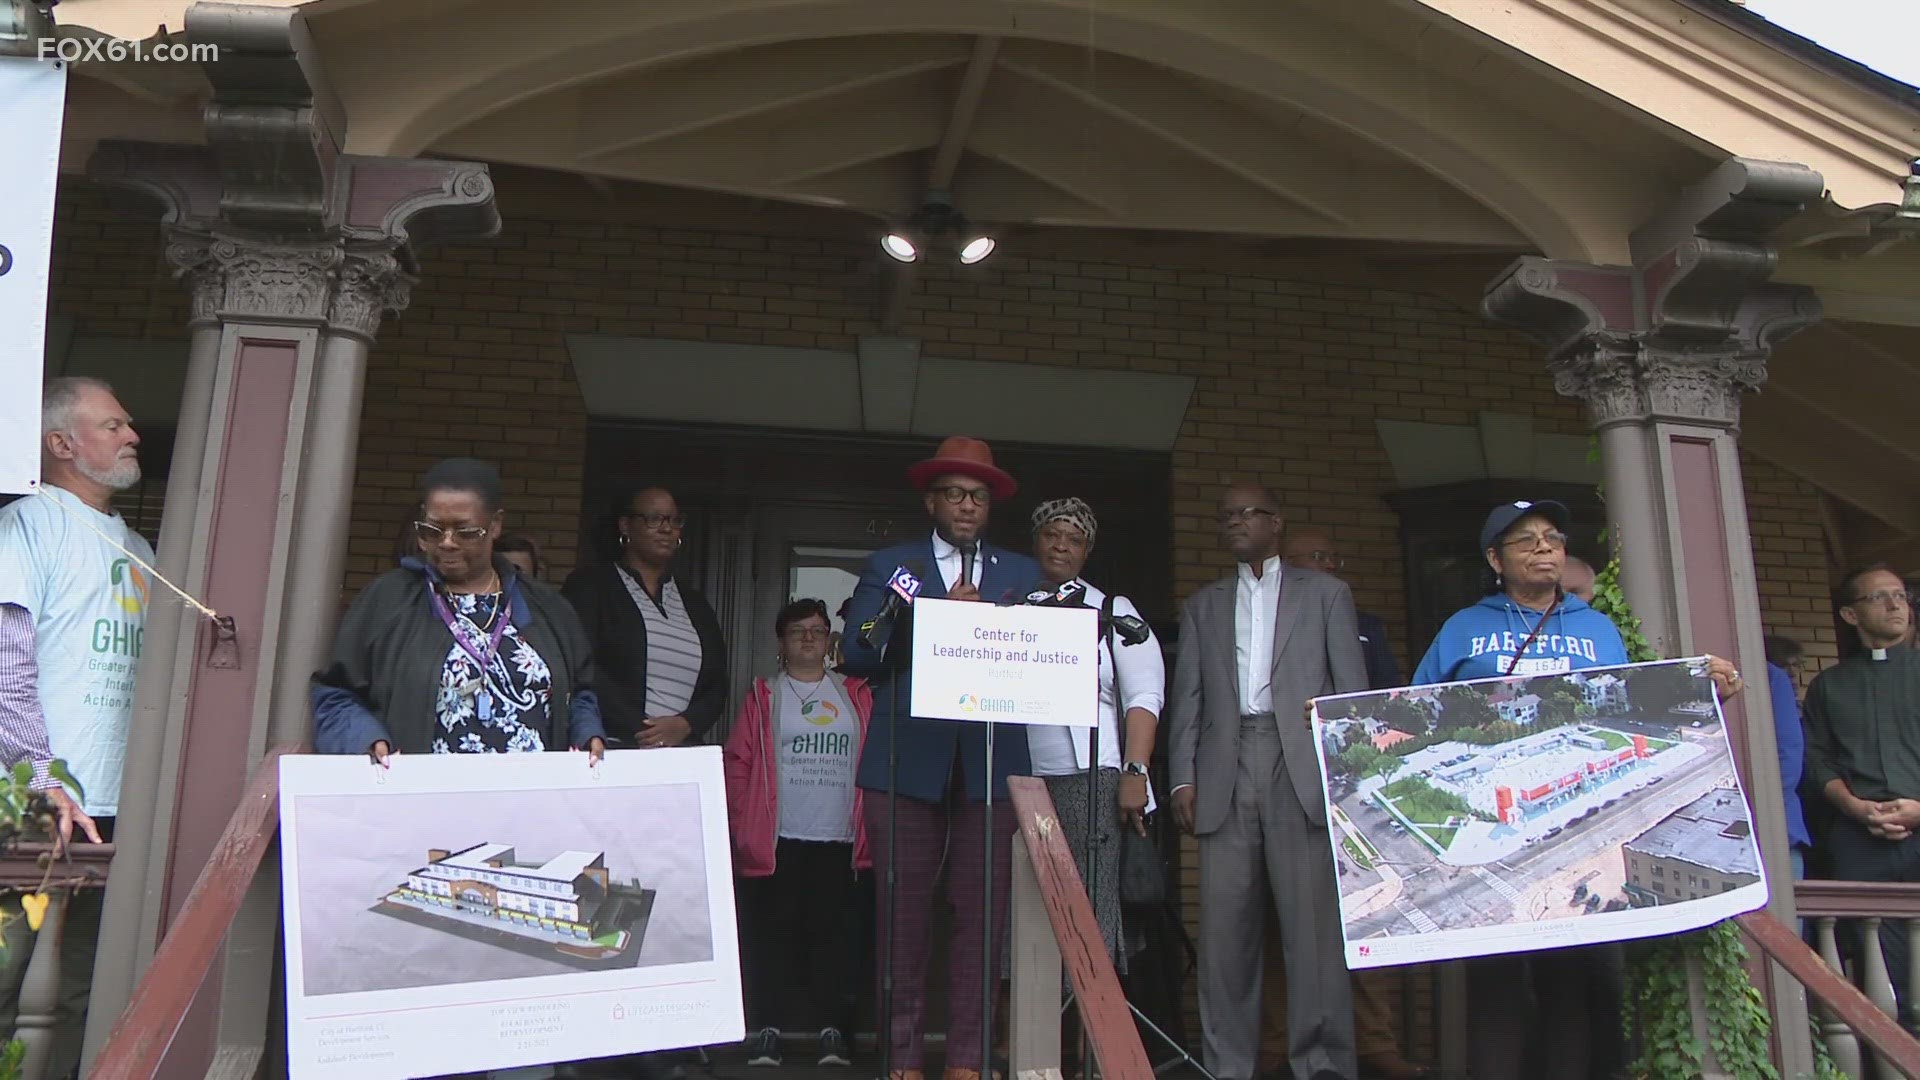 Andaleeb Properties of Bloomfield is set to move forward with several major developments along Albany Avenue. Now, housing advocates are calling for an investigation